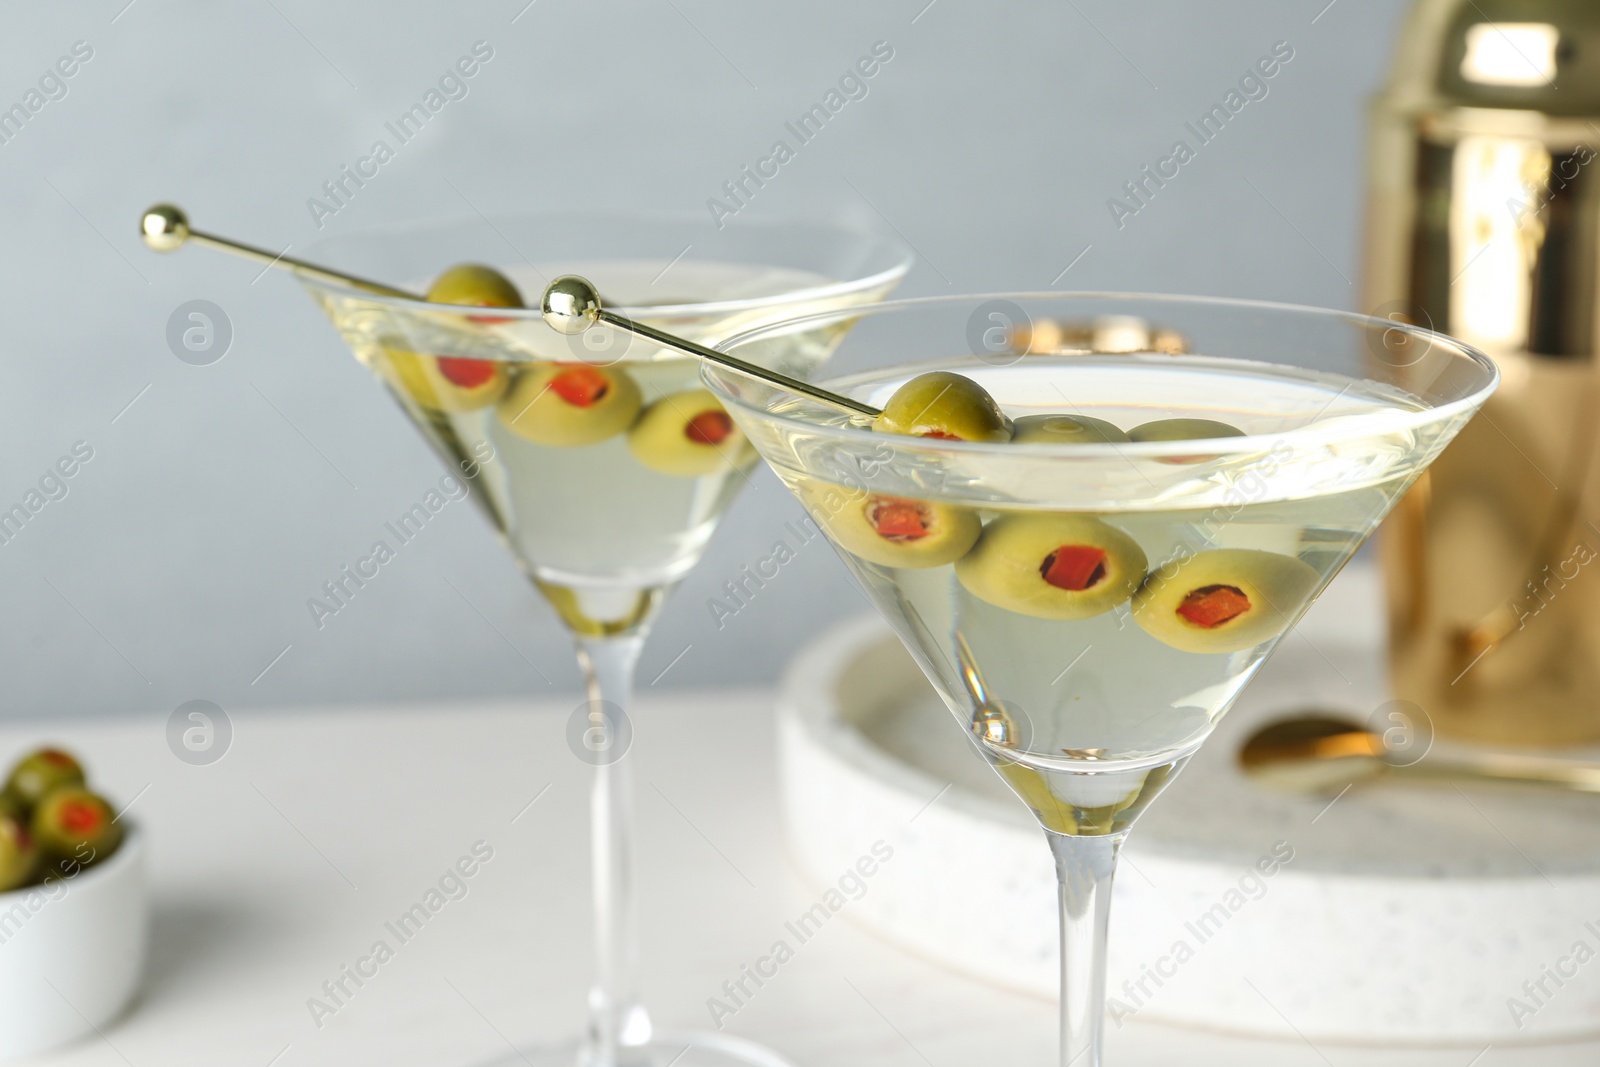 Photo of Glasses of Classic Dry Martini with olives on table against grey background